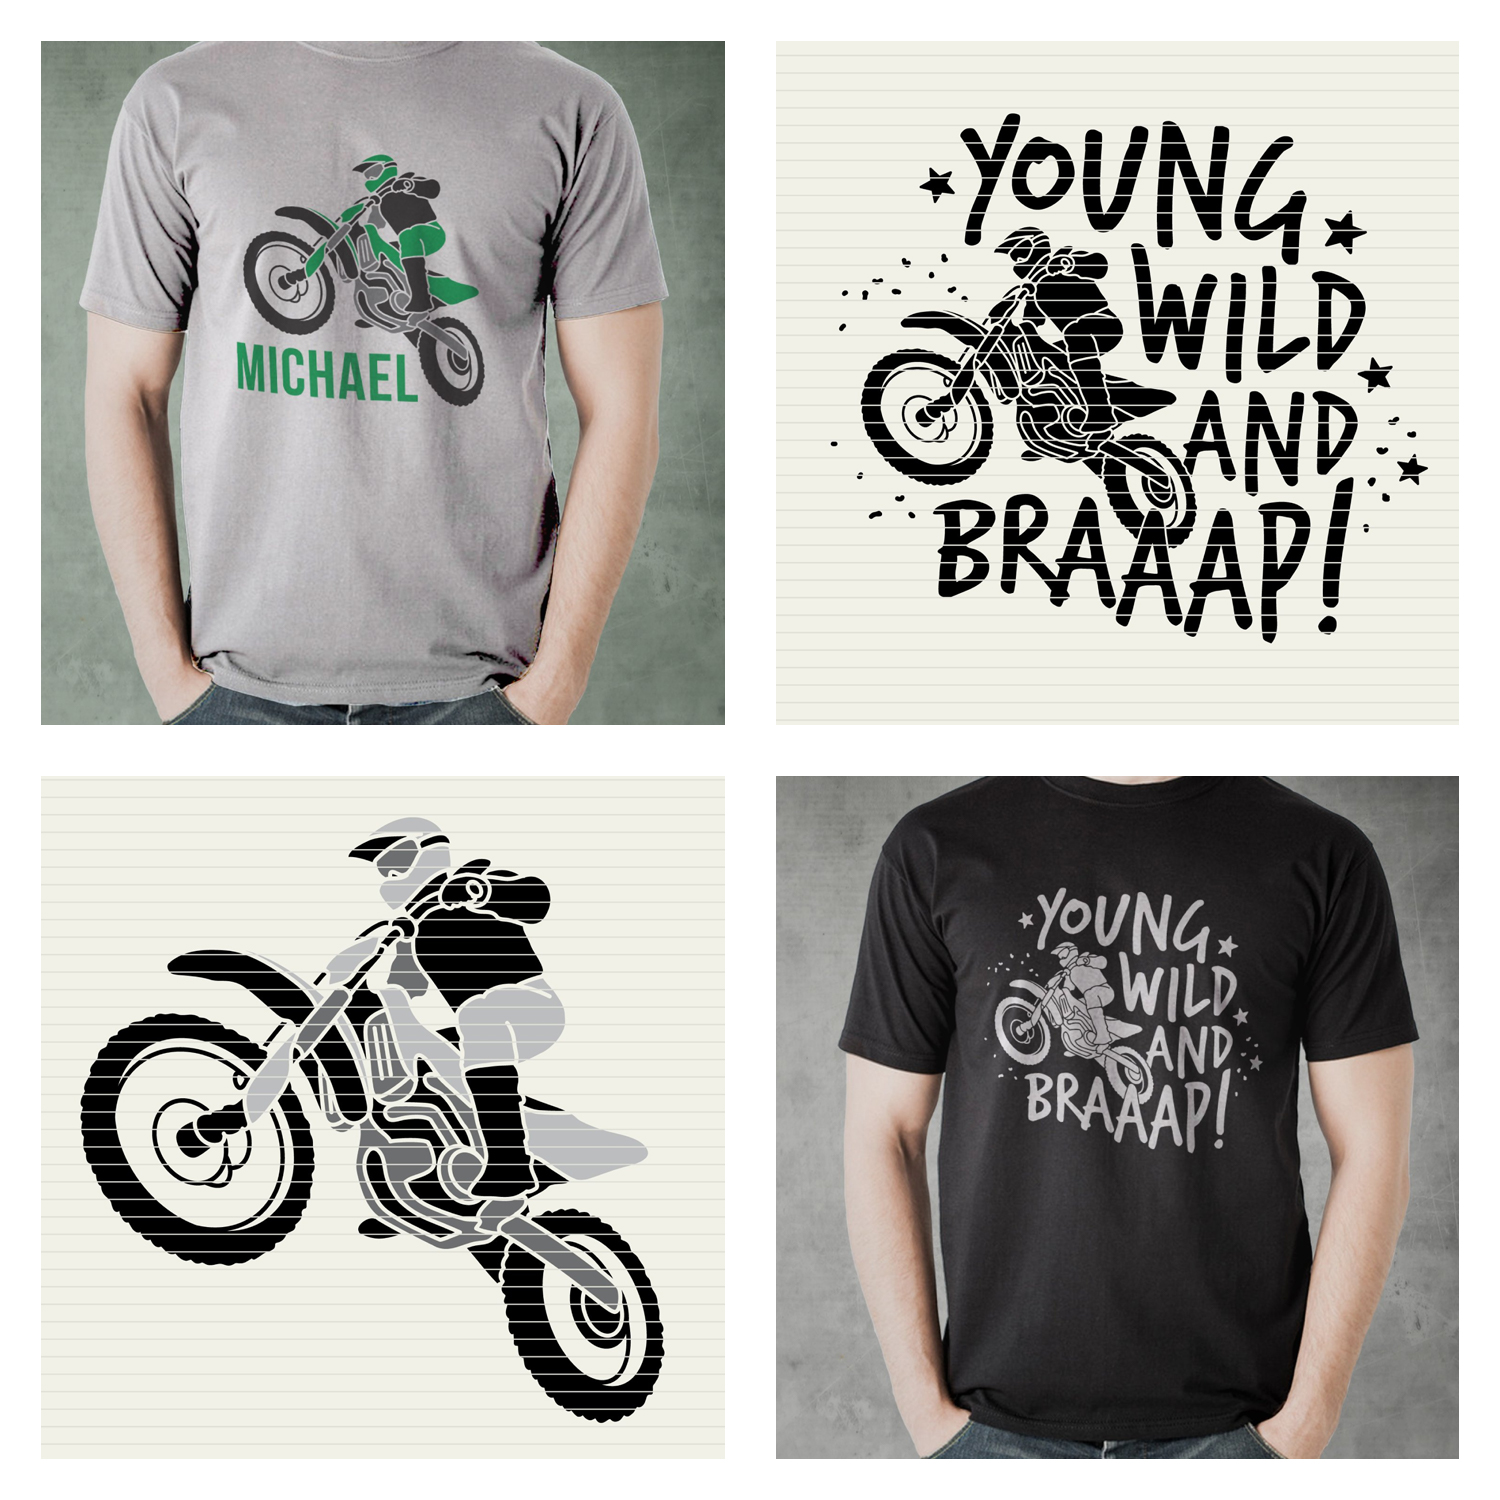 Prints of young wild and braaap boys.